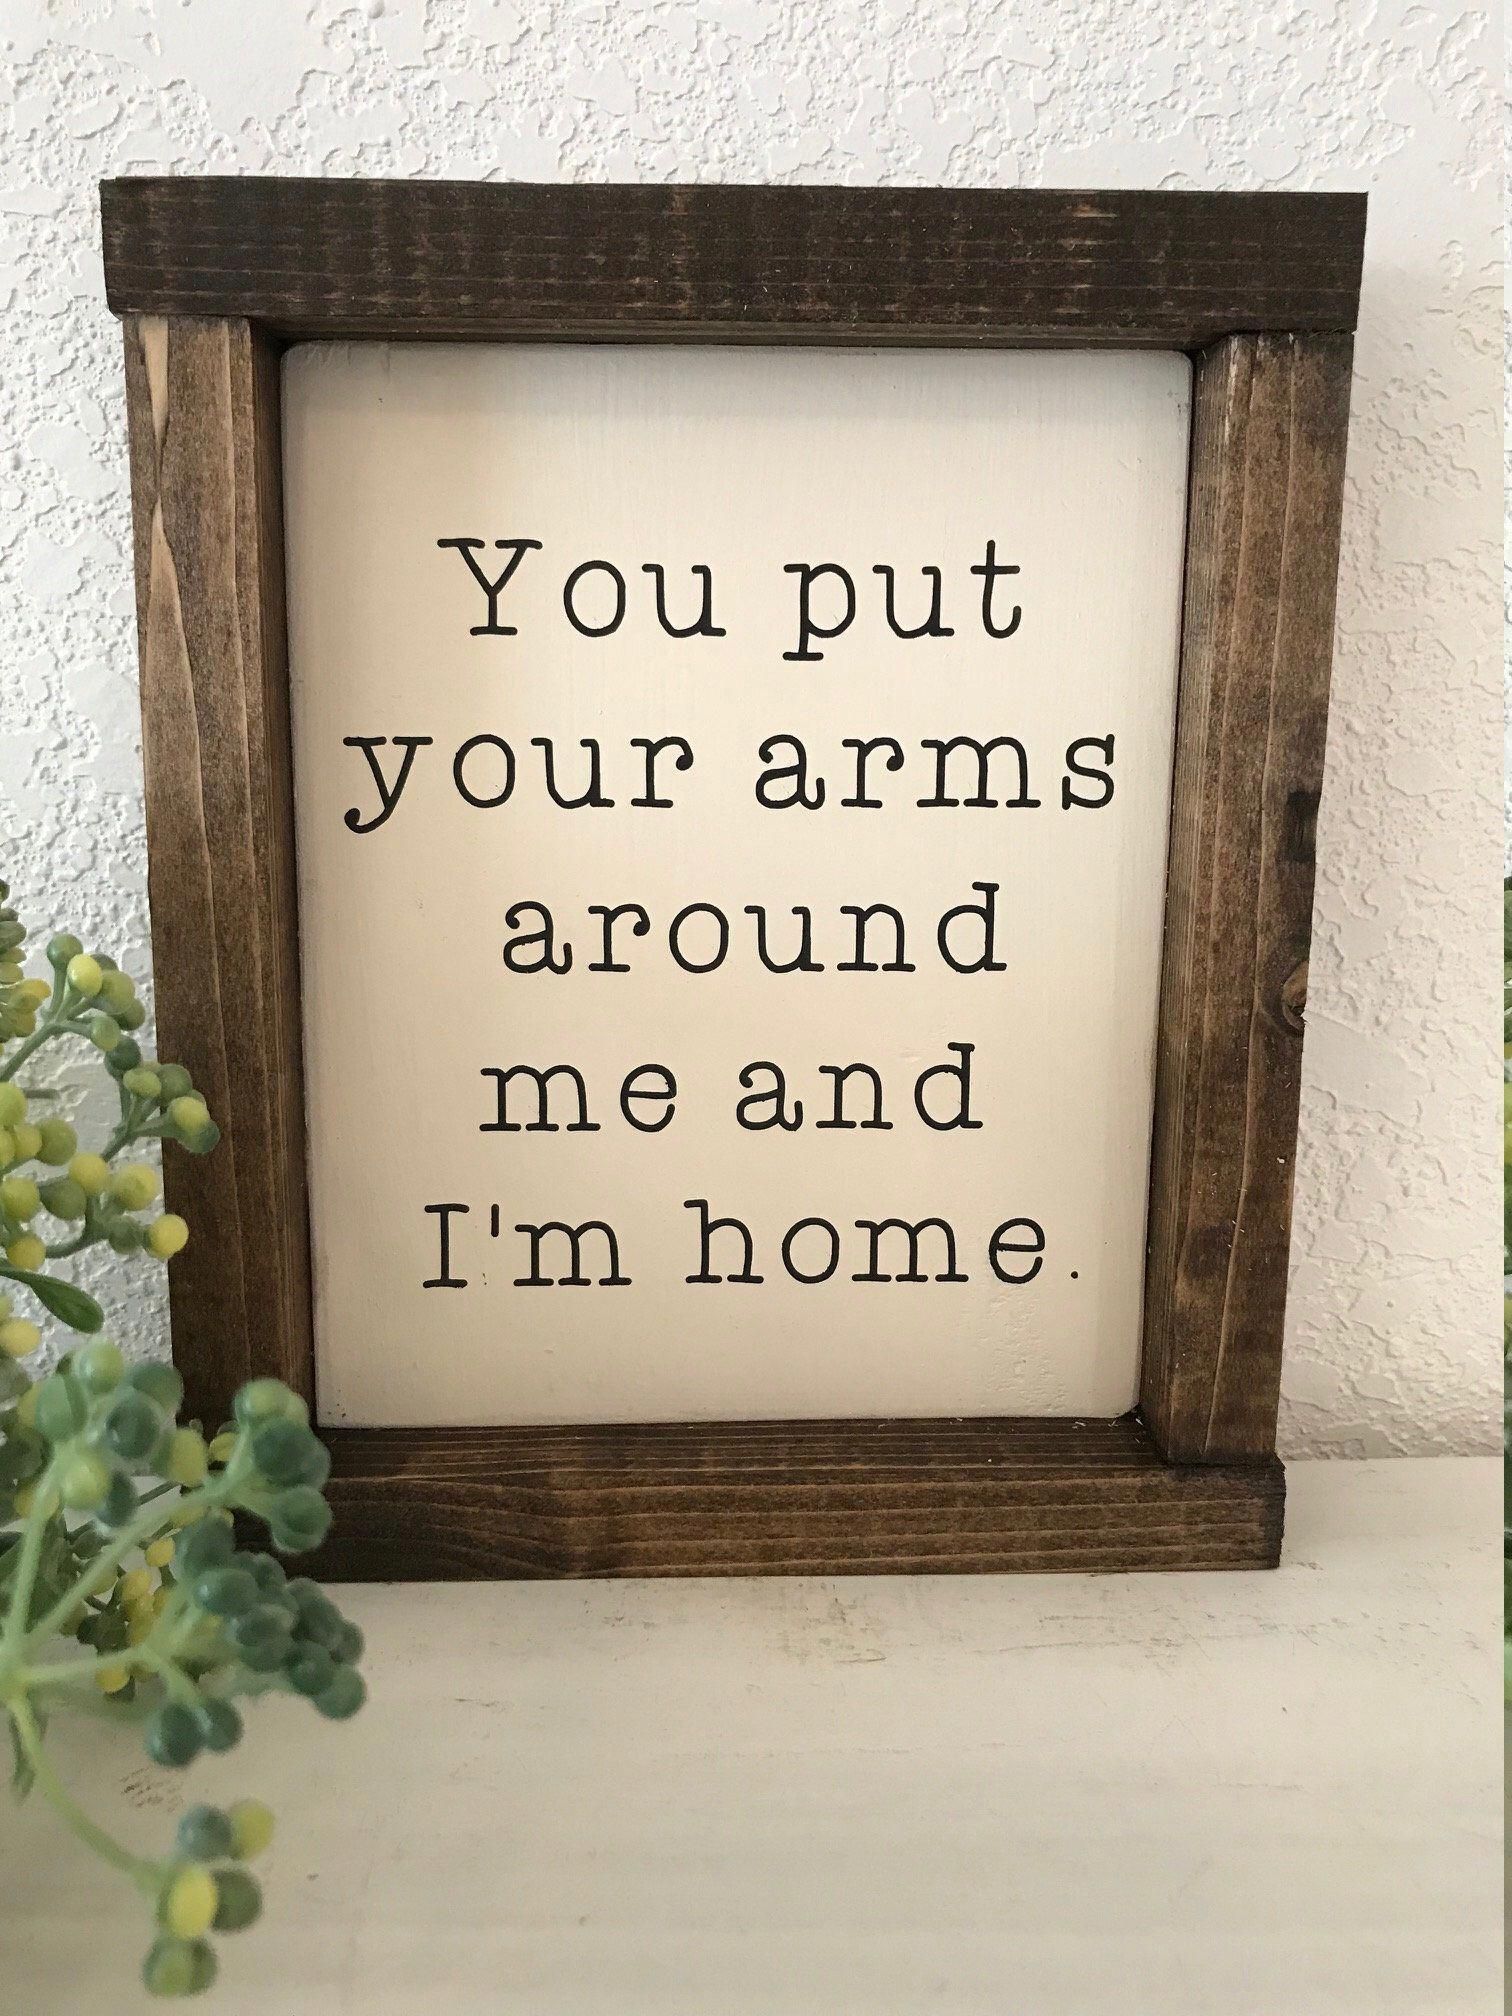 You put your arms around me and I'm home, hand-painted wood sign, farmhouse style, marrage sign, home decor, farmhouse decor, wedding sign - You put your arms around me and I'm home, hand-painted wood sign, farmhouse style, marrage sign, home decor, farmhouse decor, wedding sign -   15 diy Home Decor unique ideas